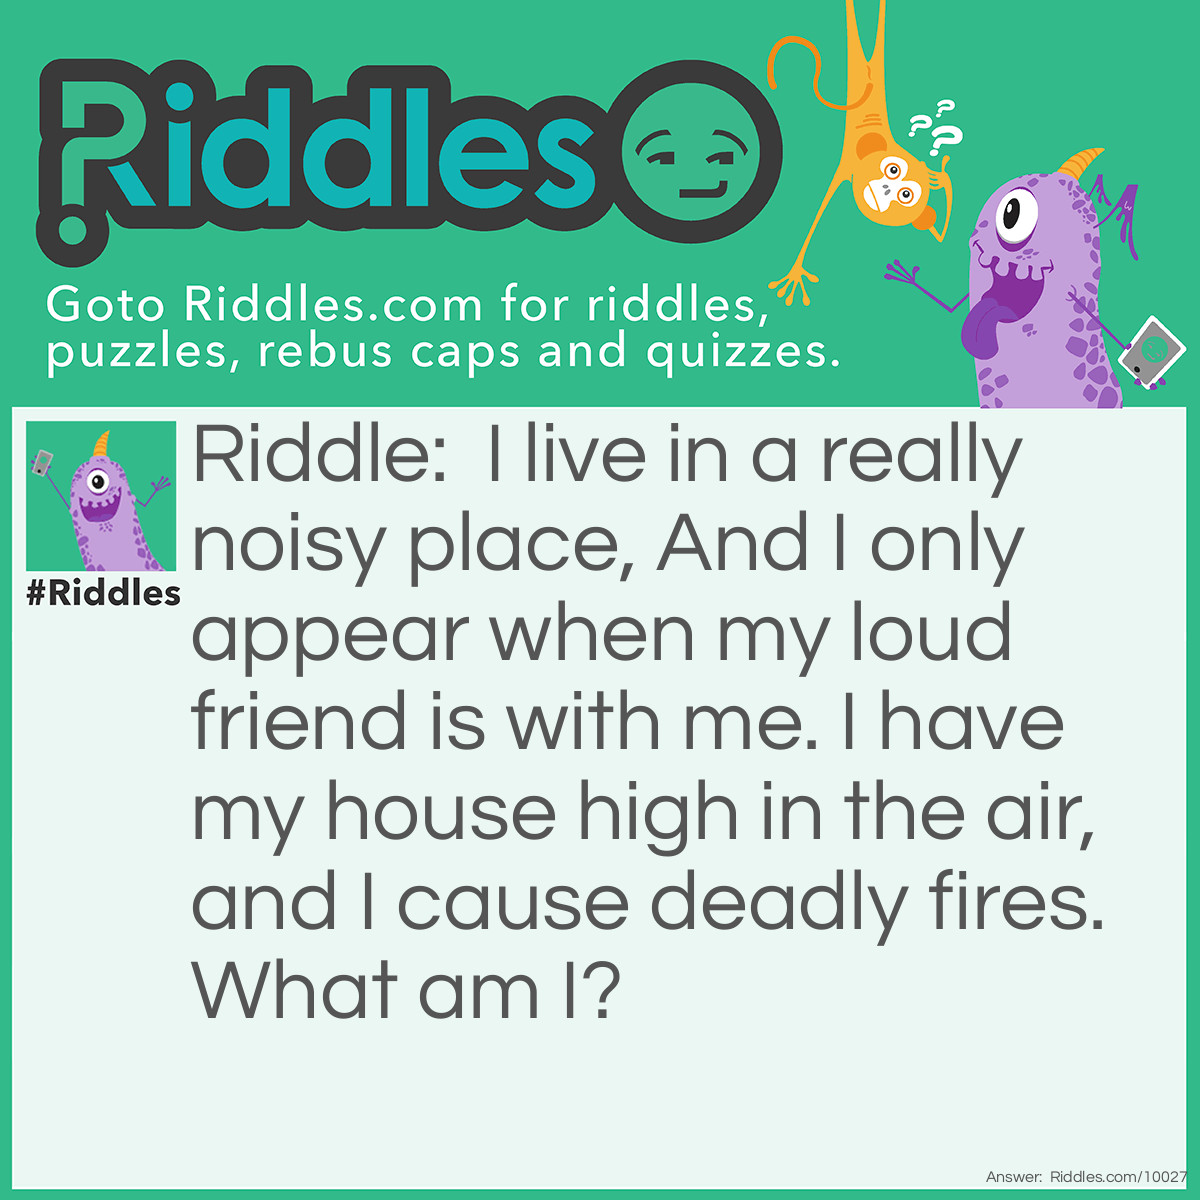 Riddle: I live in a really noisy place, And I only appear when my loud friend is with me. I have my house high in the air, and I cause deadly fires. What am I? Answer: Lightning lives in a noisy place, And it doesn't appear without thunder. It has it's house high in the air, And it cause deadly fires.